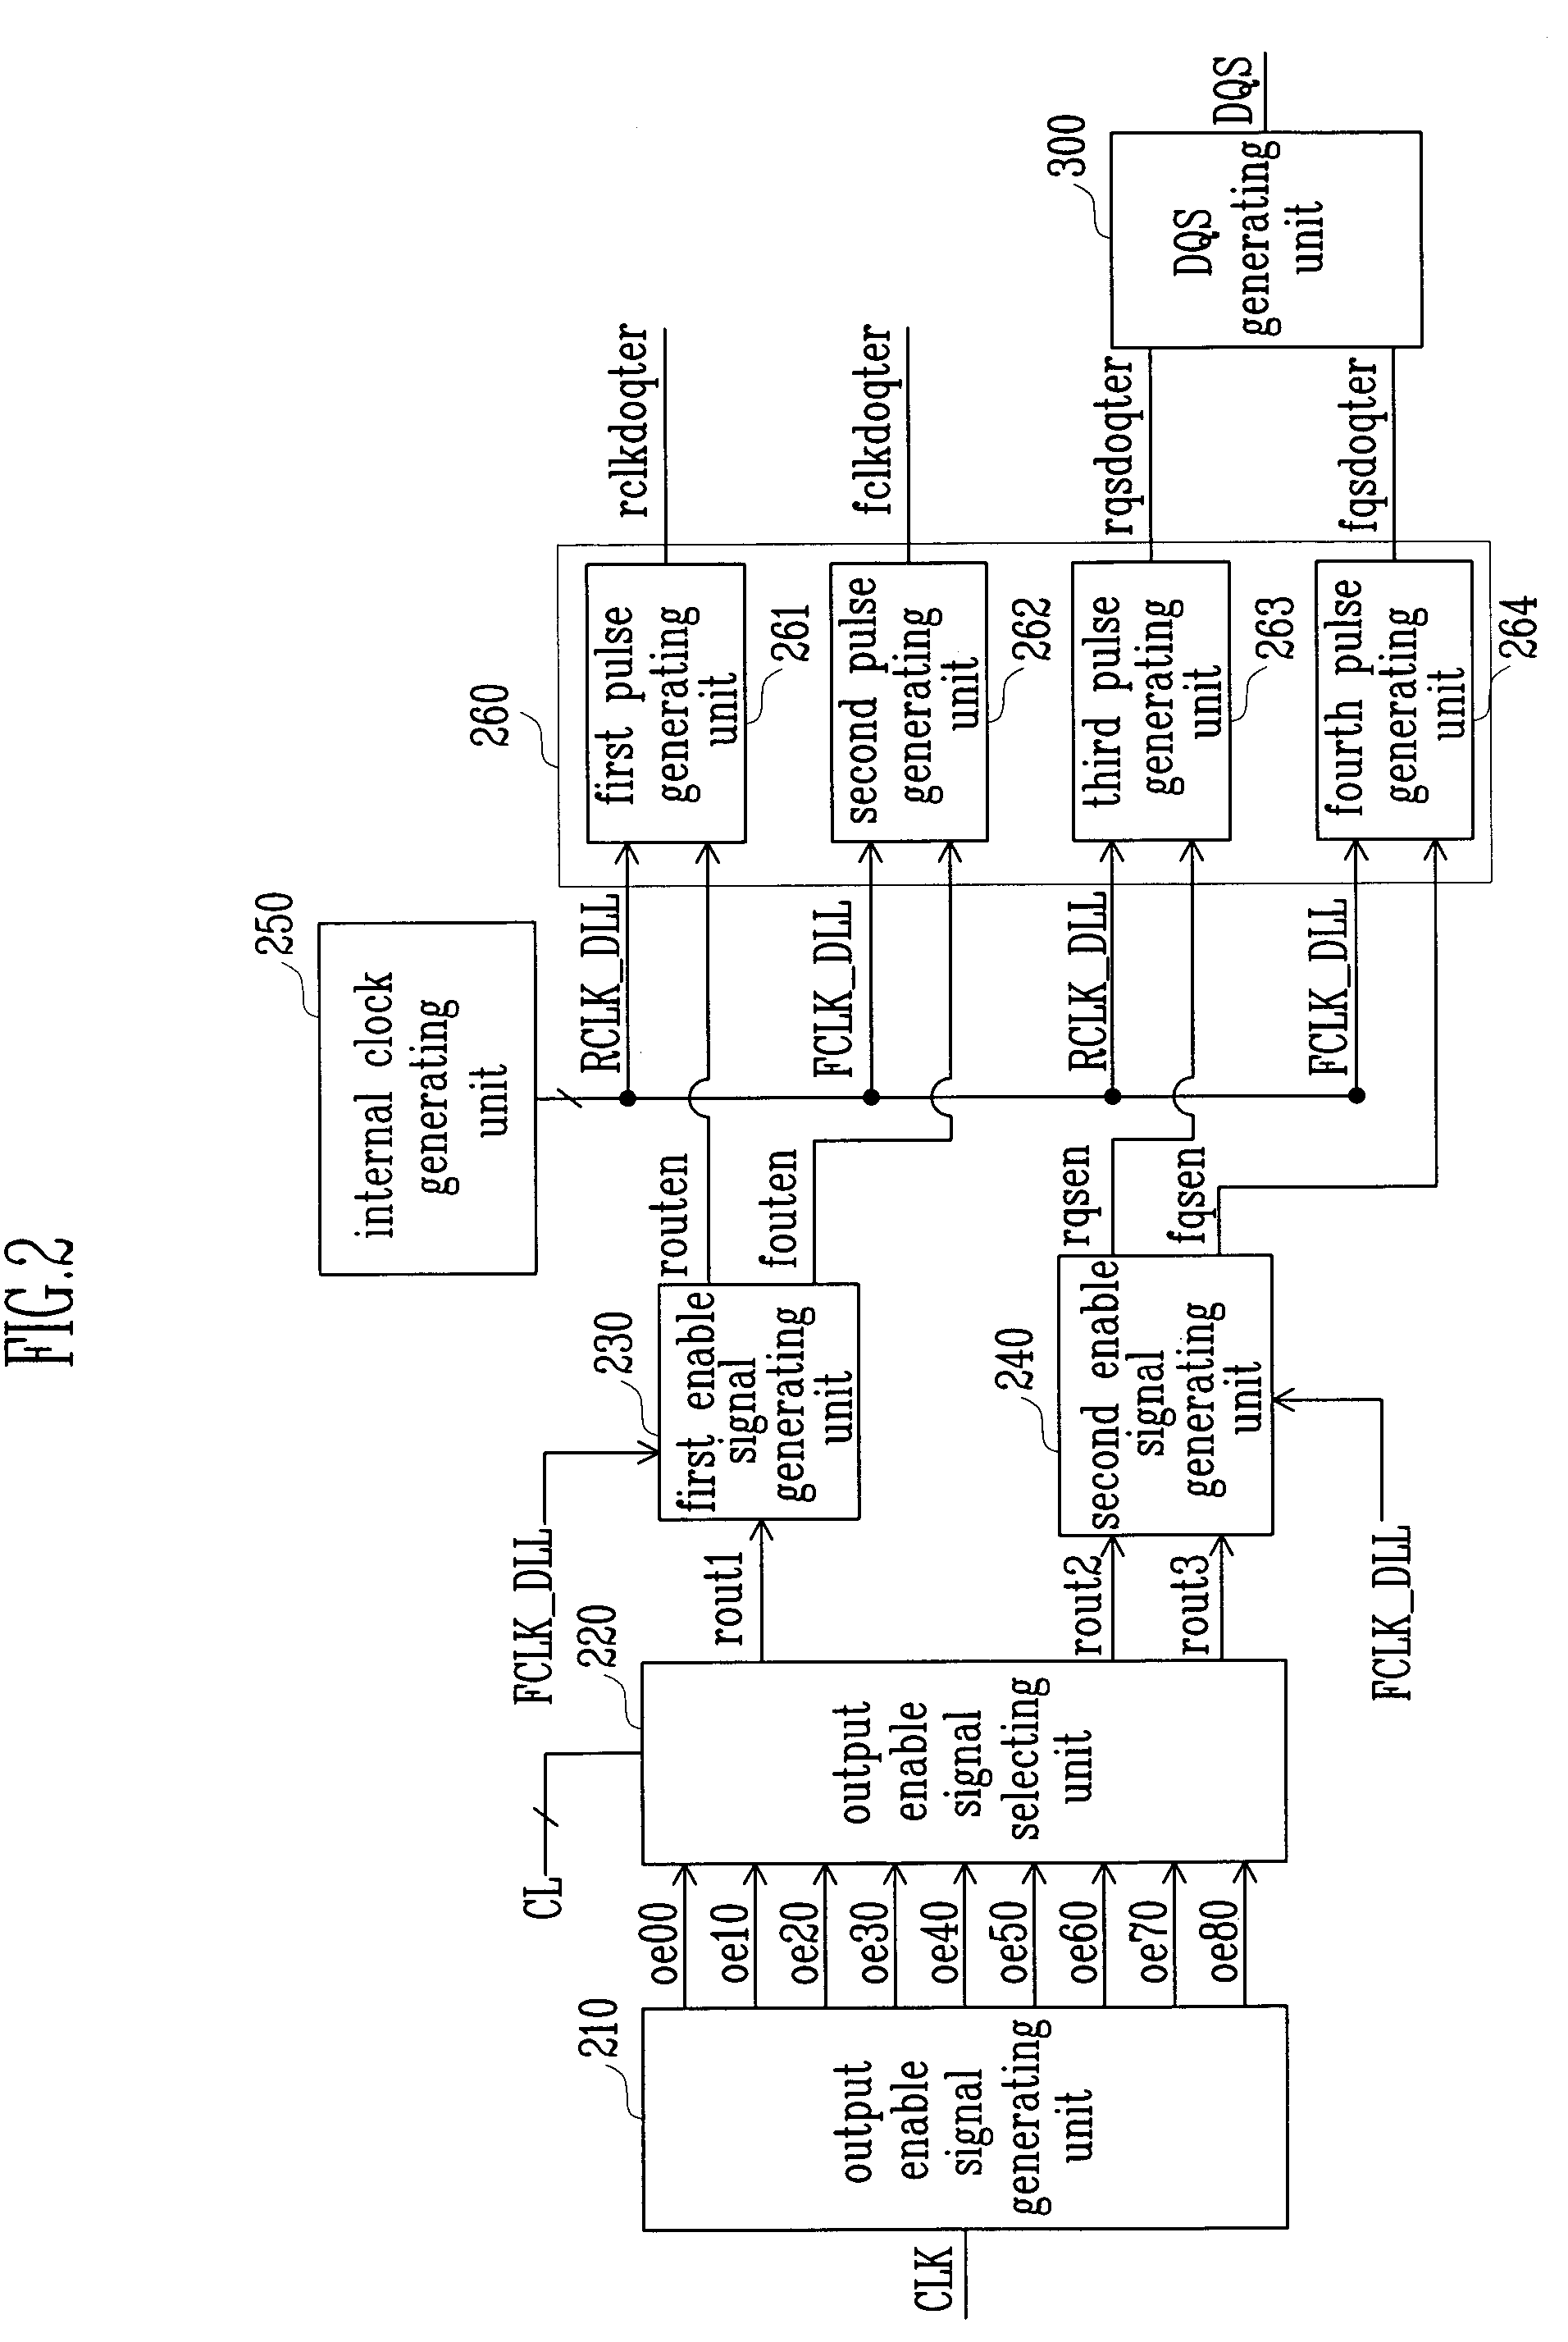 Circuit for generating data strobe signal in DDR memory device, and method therefor